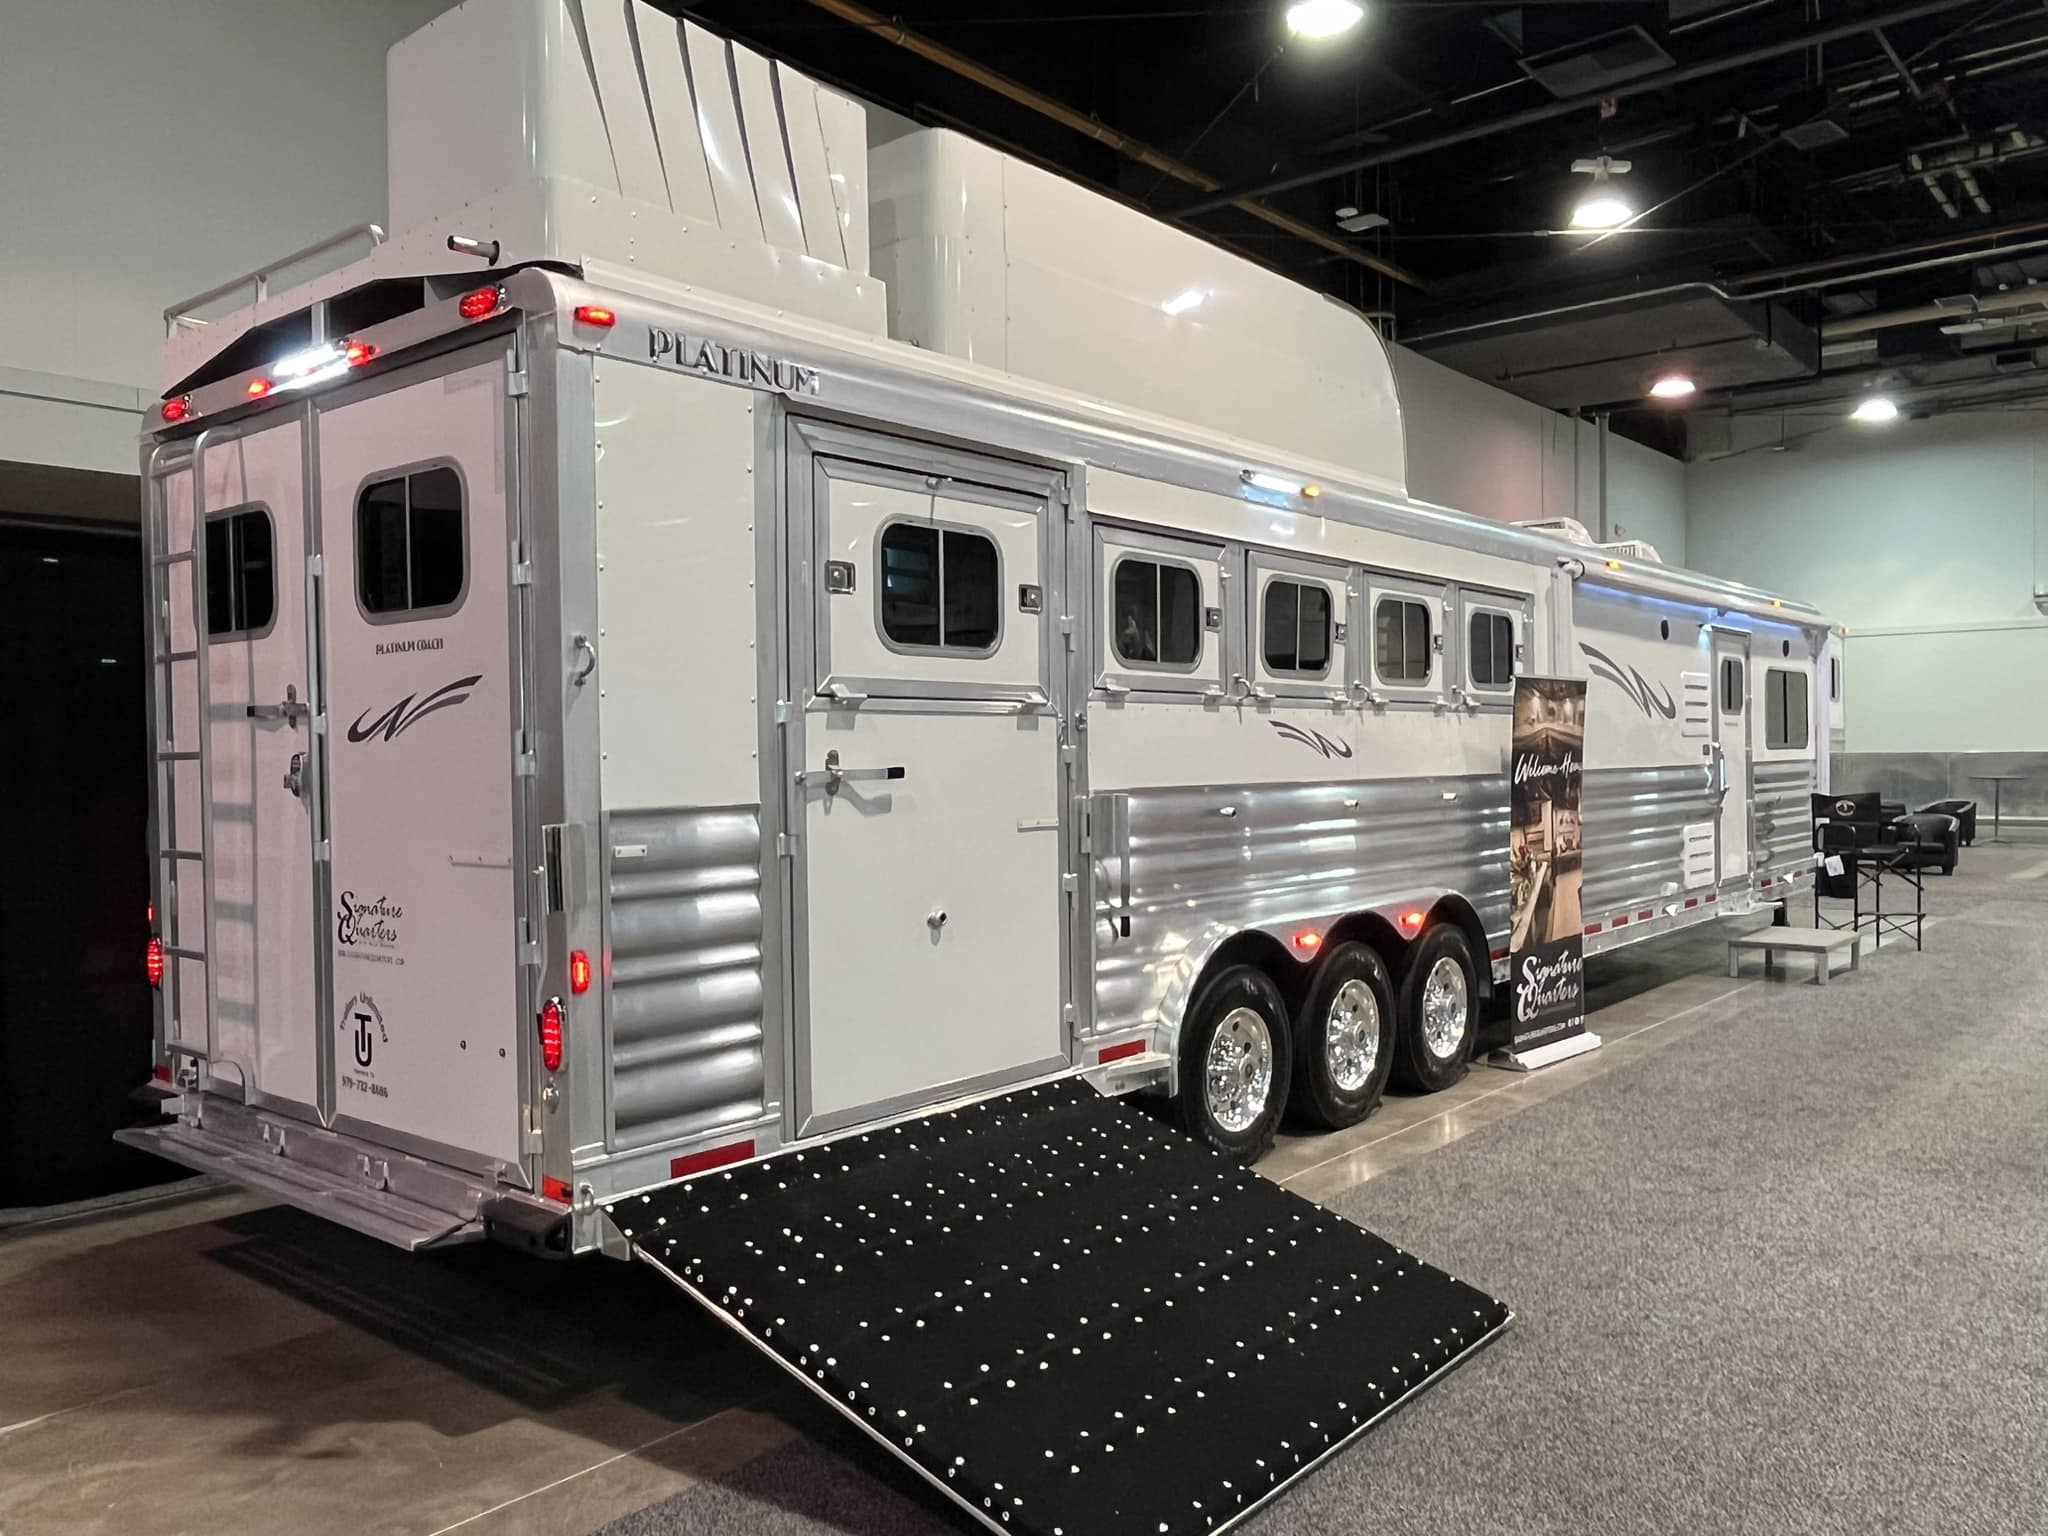 Trailers Unlimited at Las Vegas